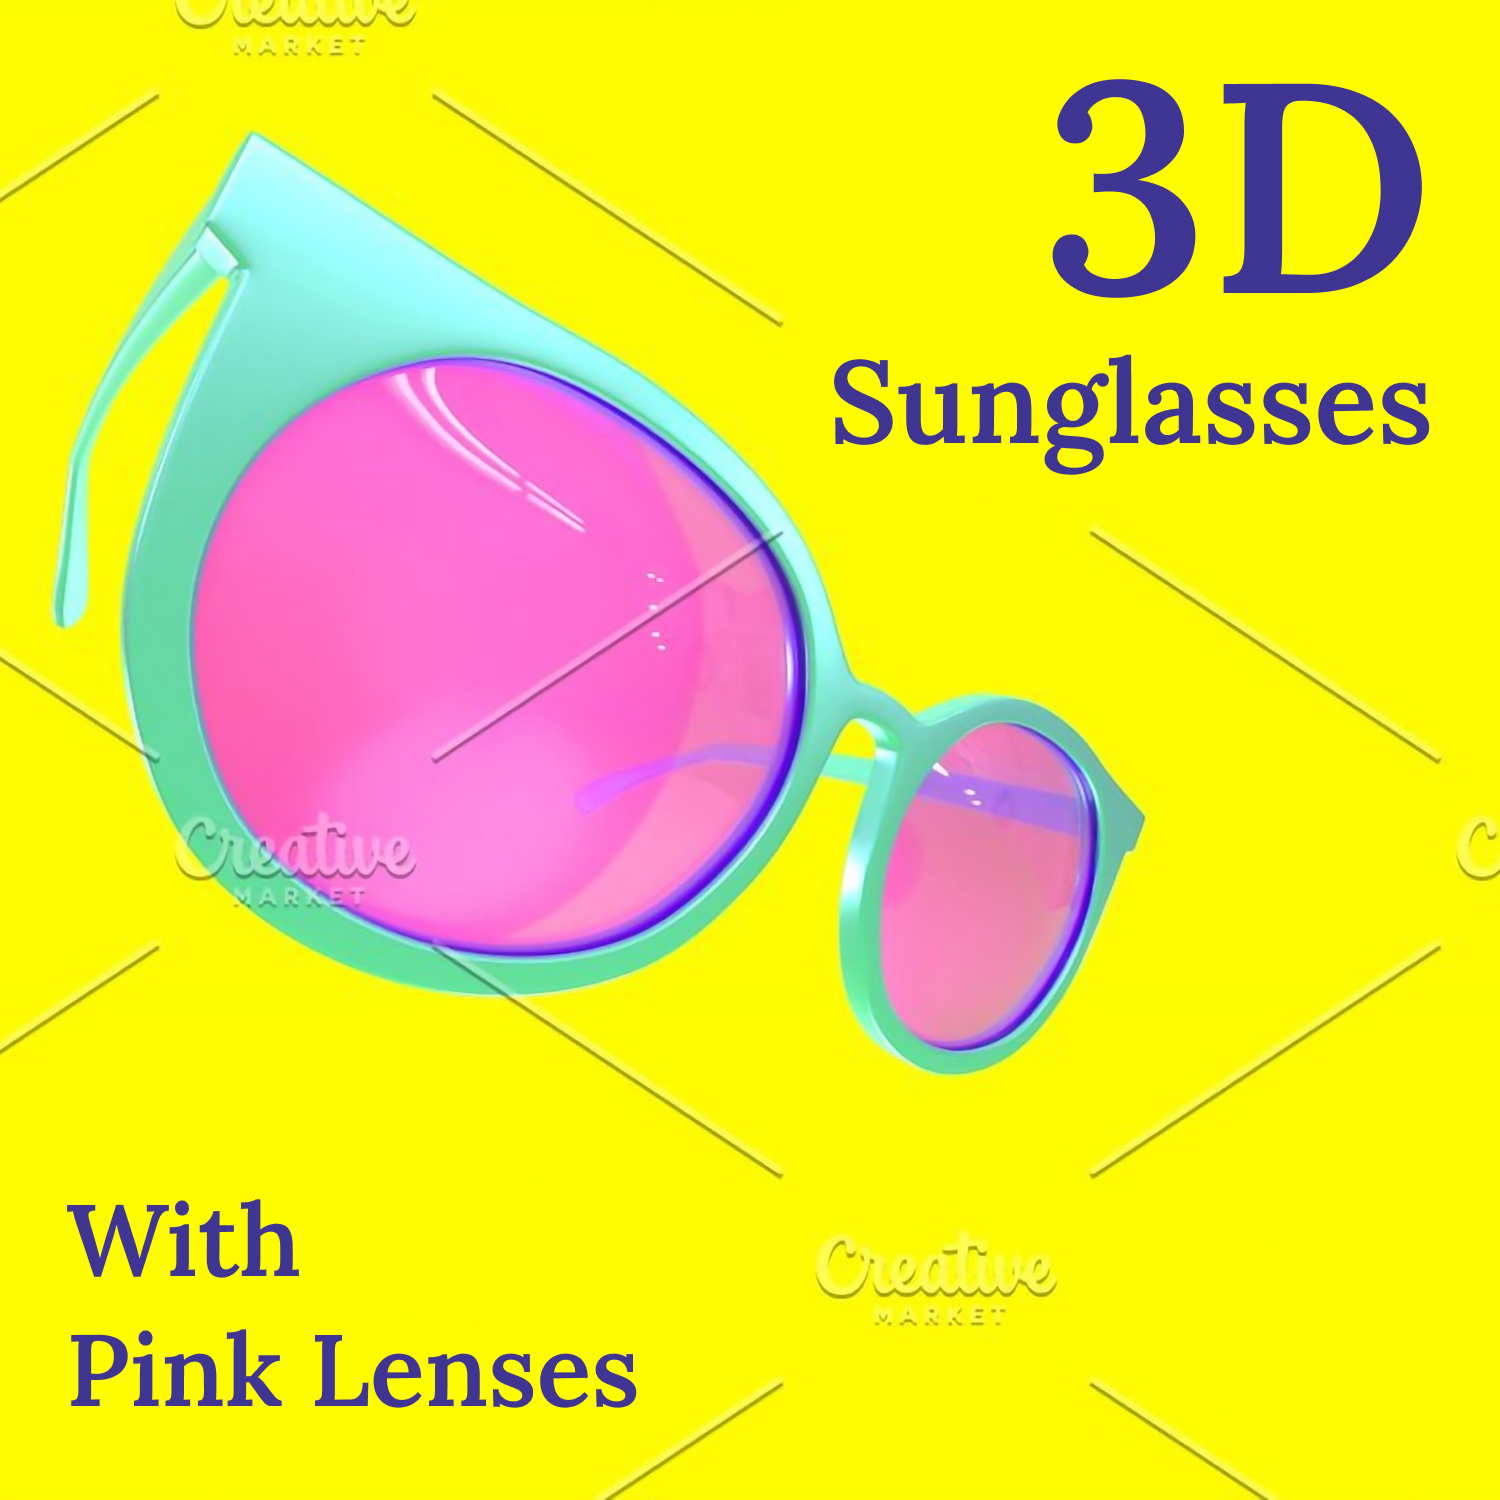 Images preview 3d sunglasses with pink lenses.